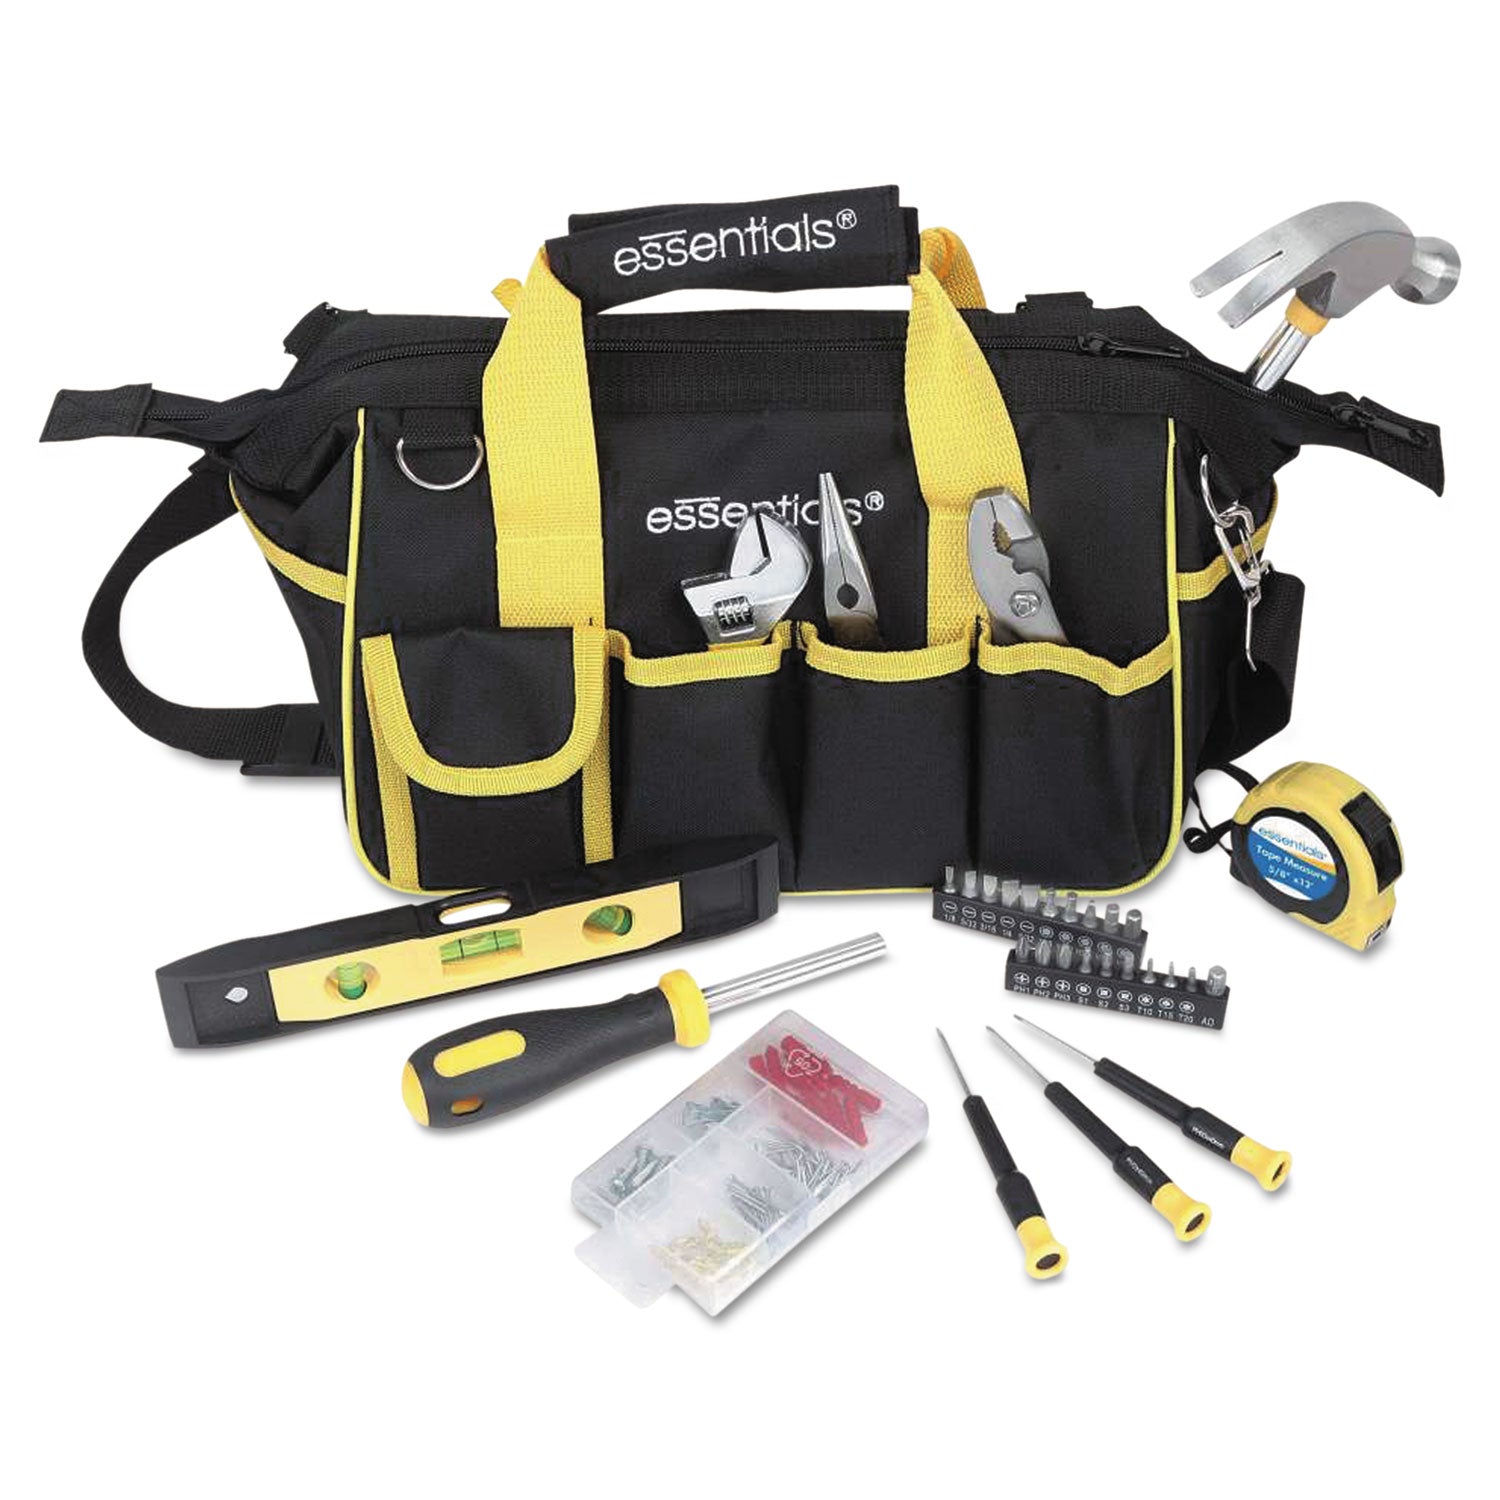 32-Piece Expanded Tool Kit with Bag - 